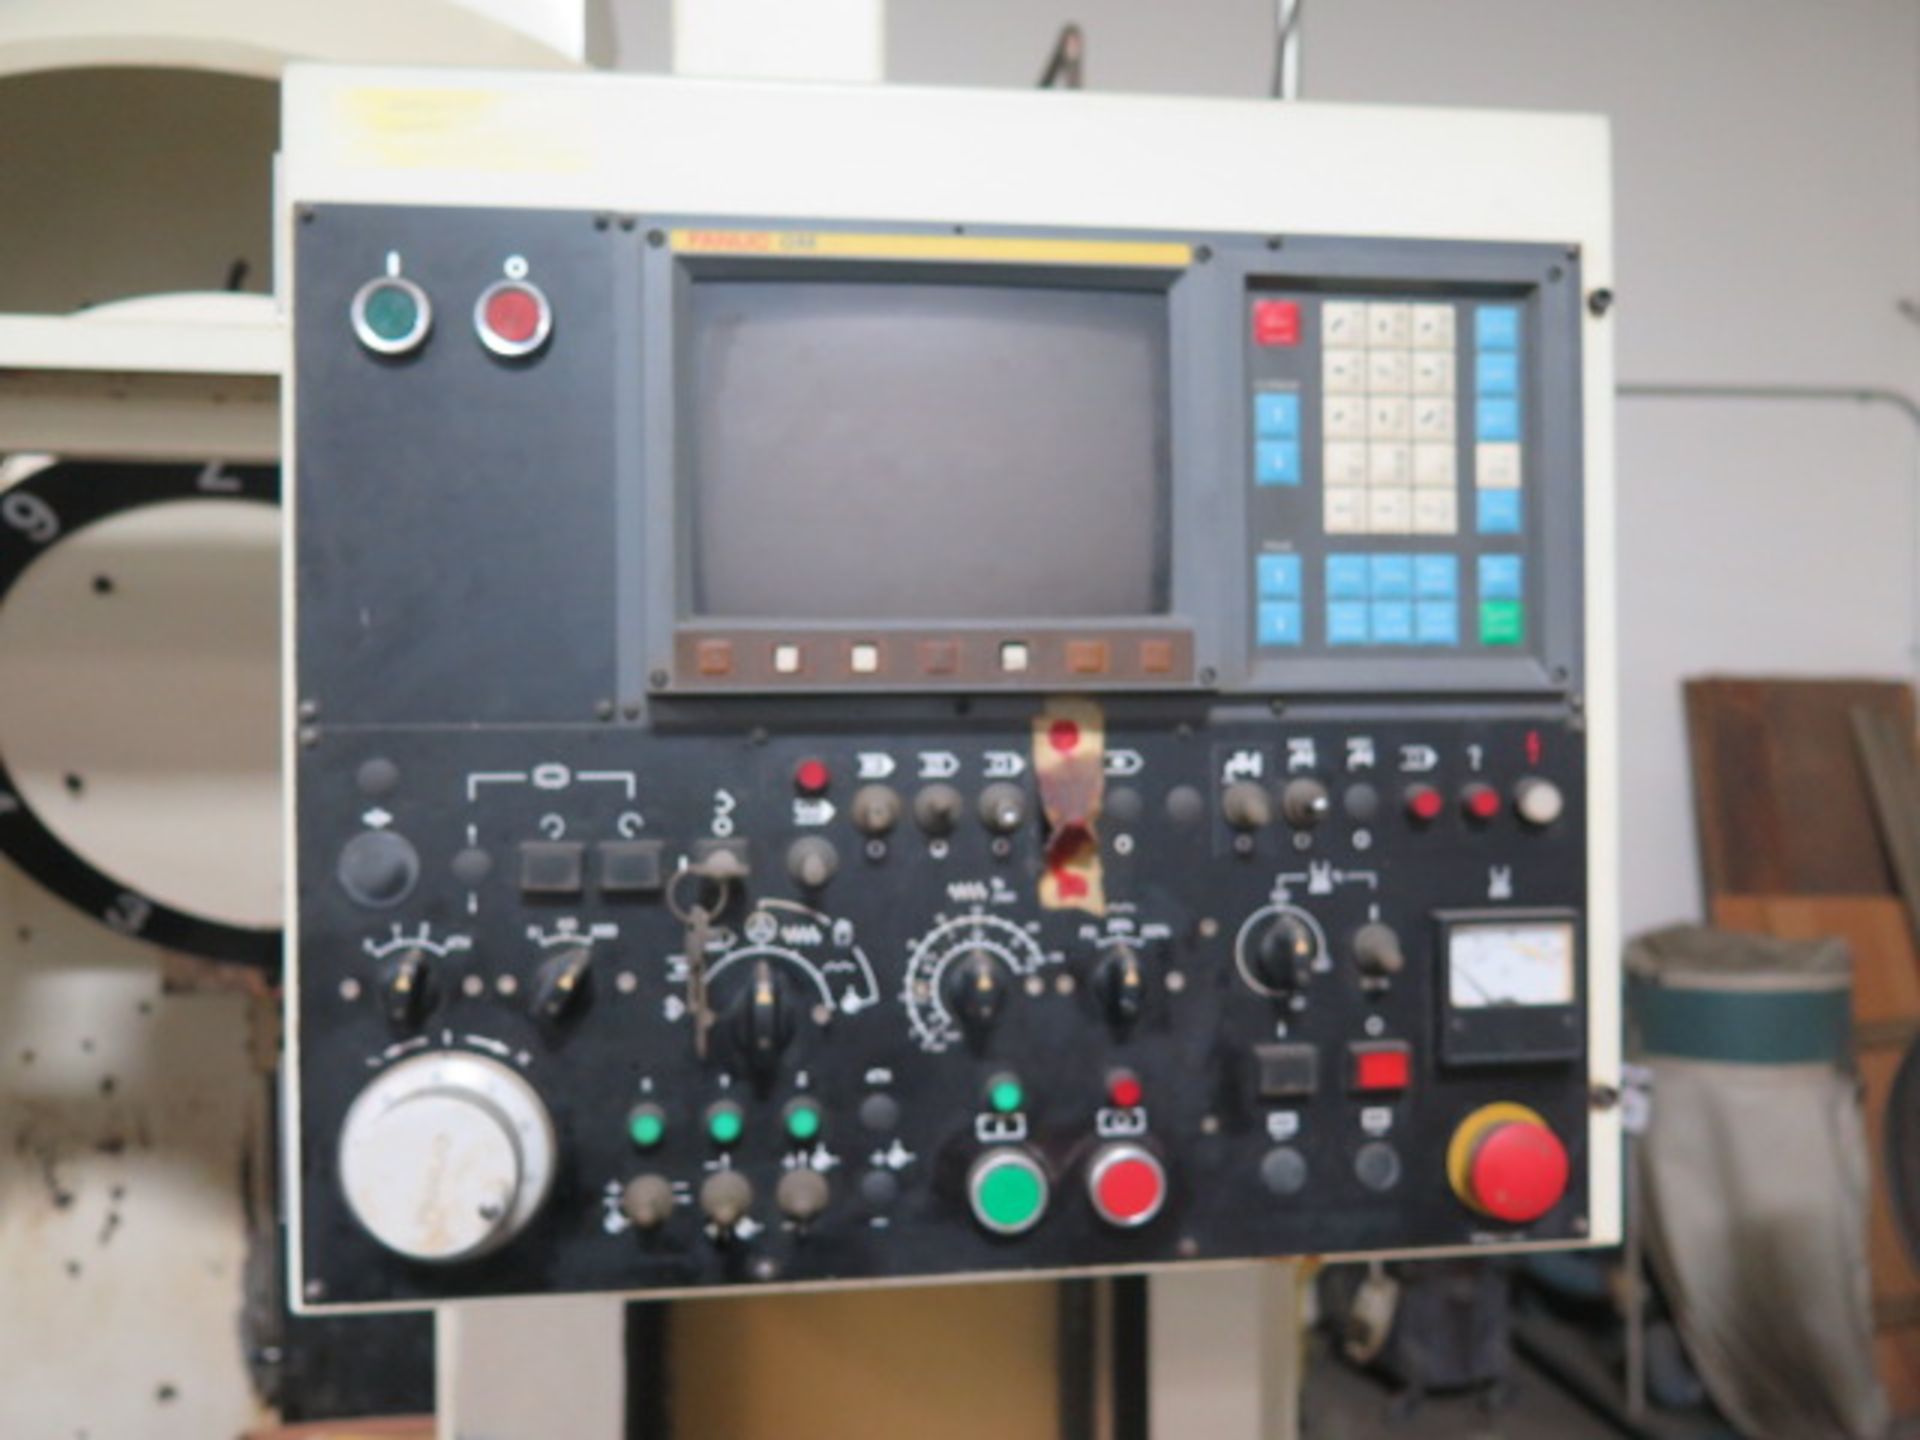 Takisawa MAC-V1E CNC Drilling/Tapping Center s/n TMYP8181 (X AXIS MOTOR MAKING NOISE), SOLD AS IS - Image 12 of 19